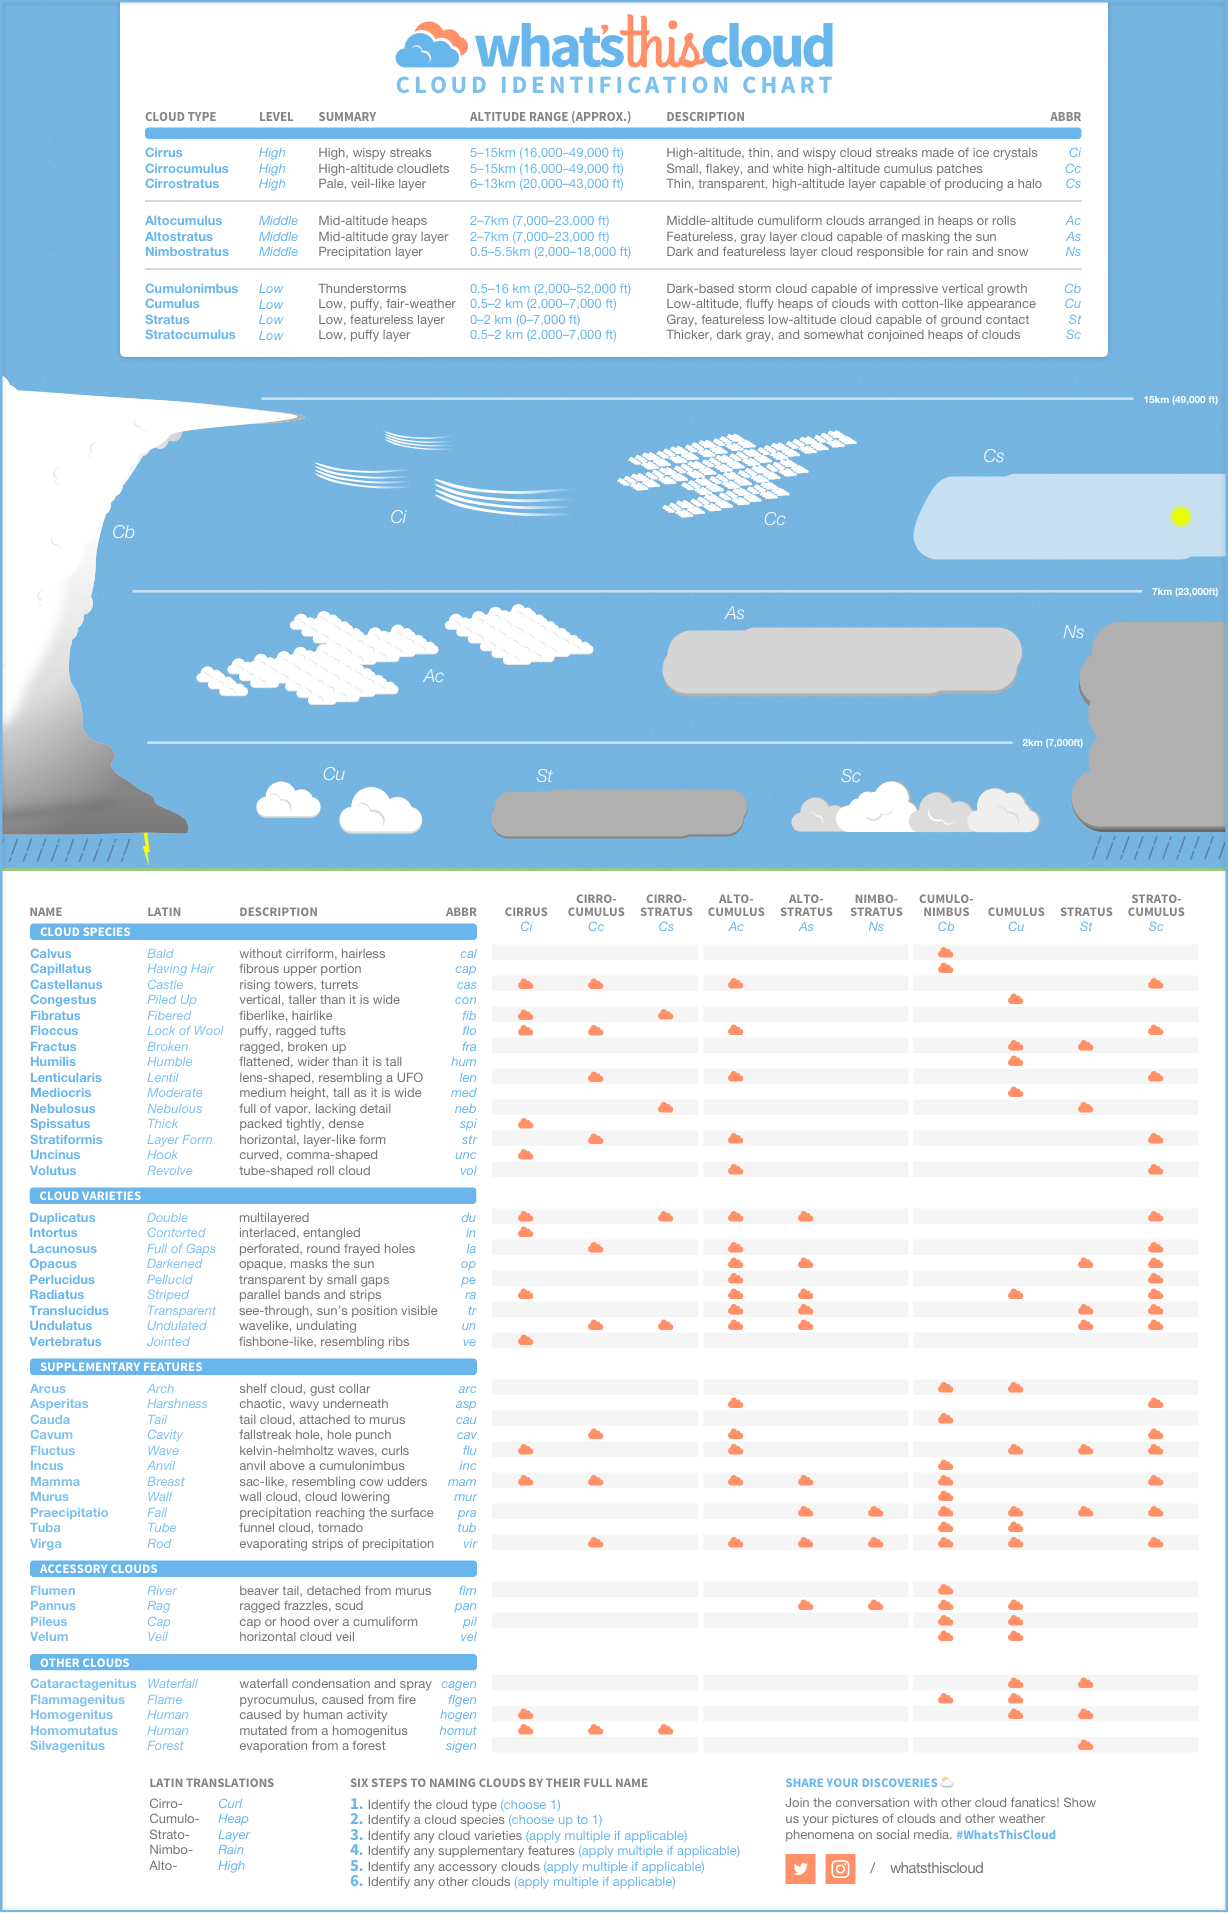 A cloud identification chart, poster, and printable worksheet guide to help with cloud identification